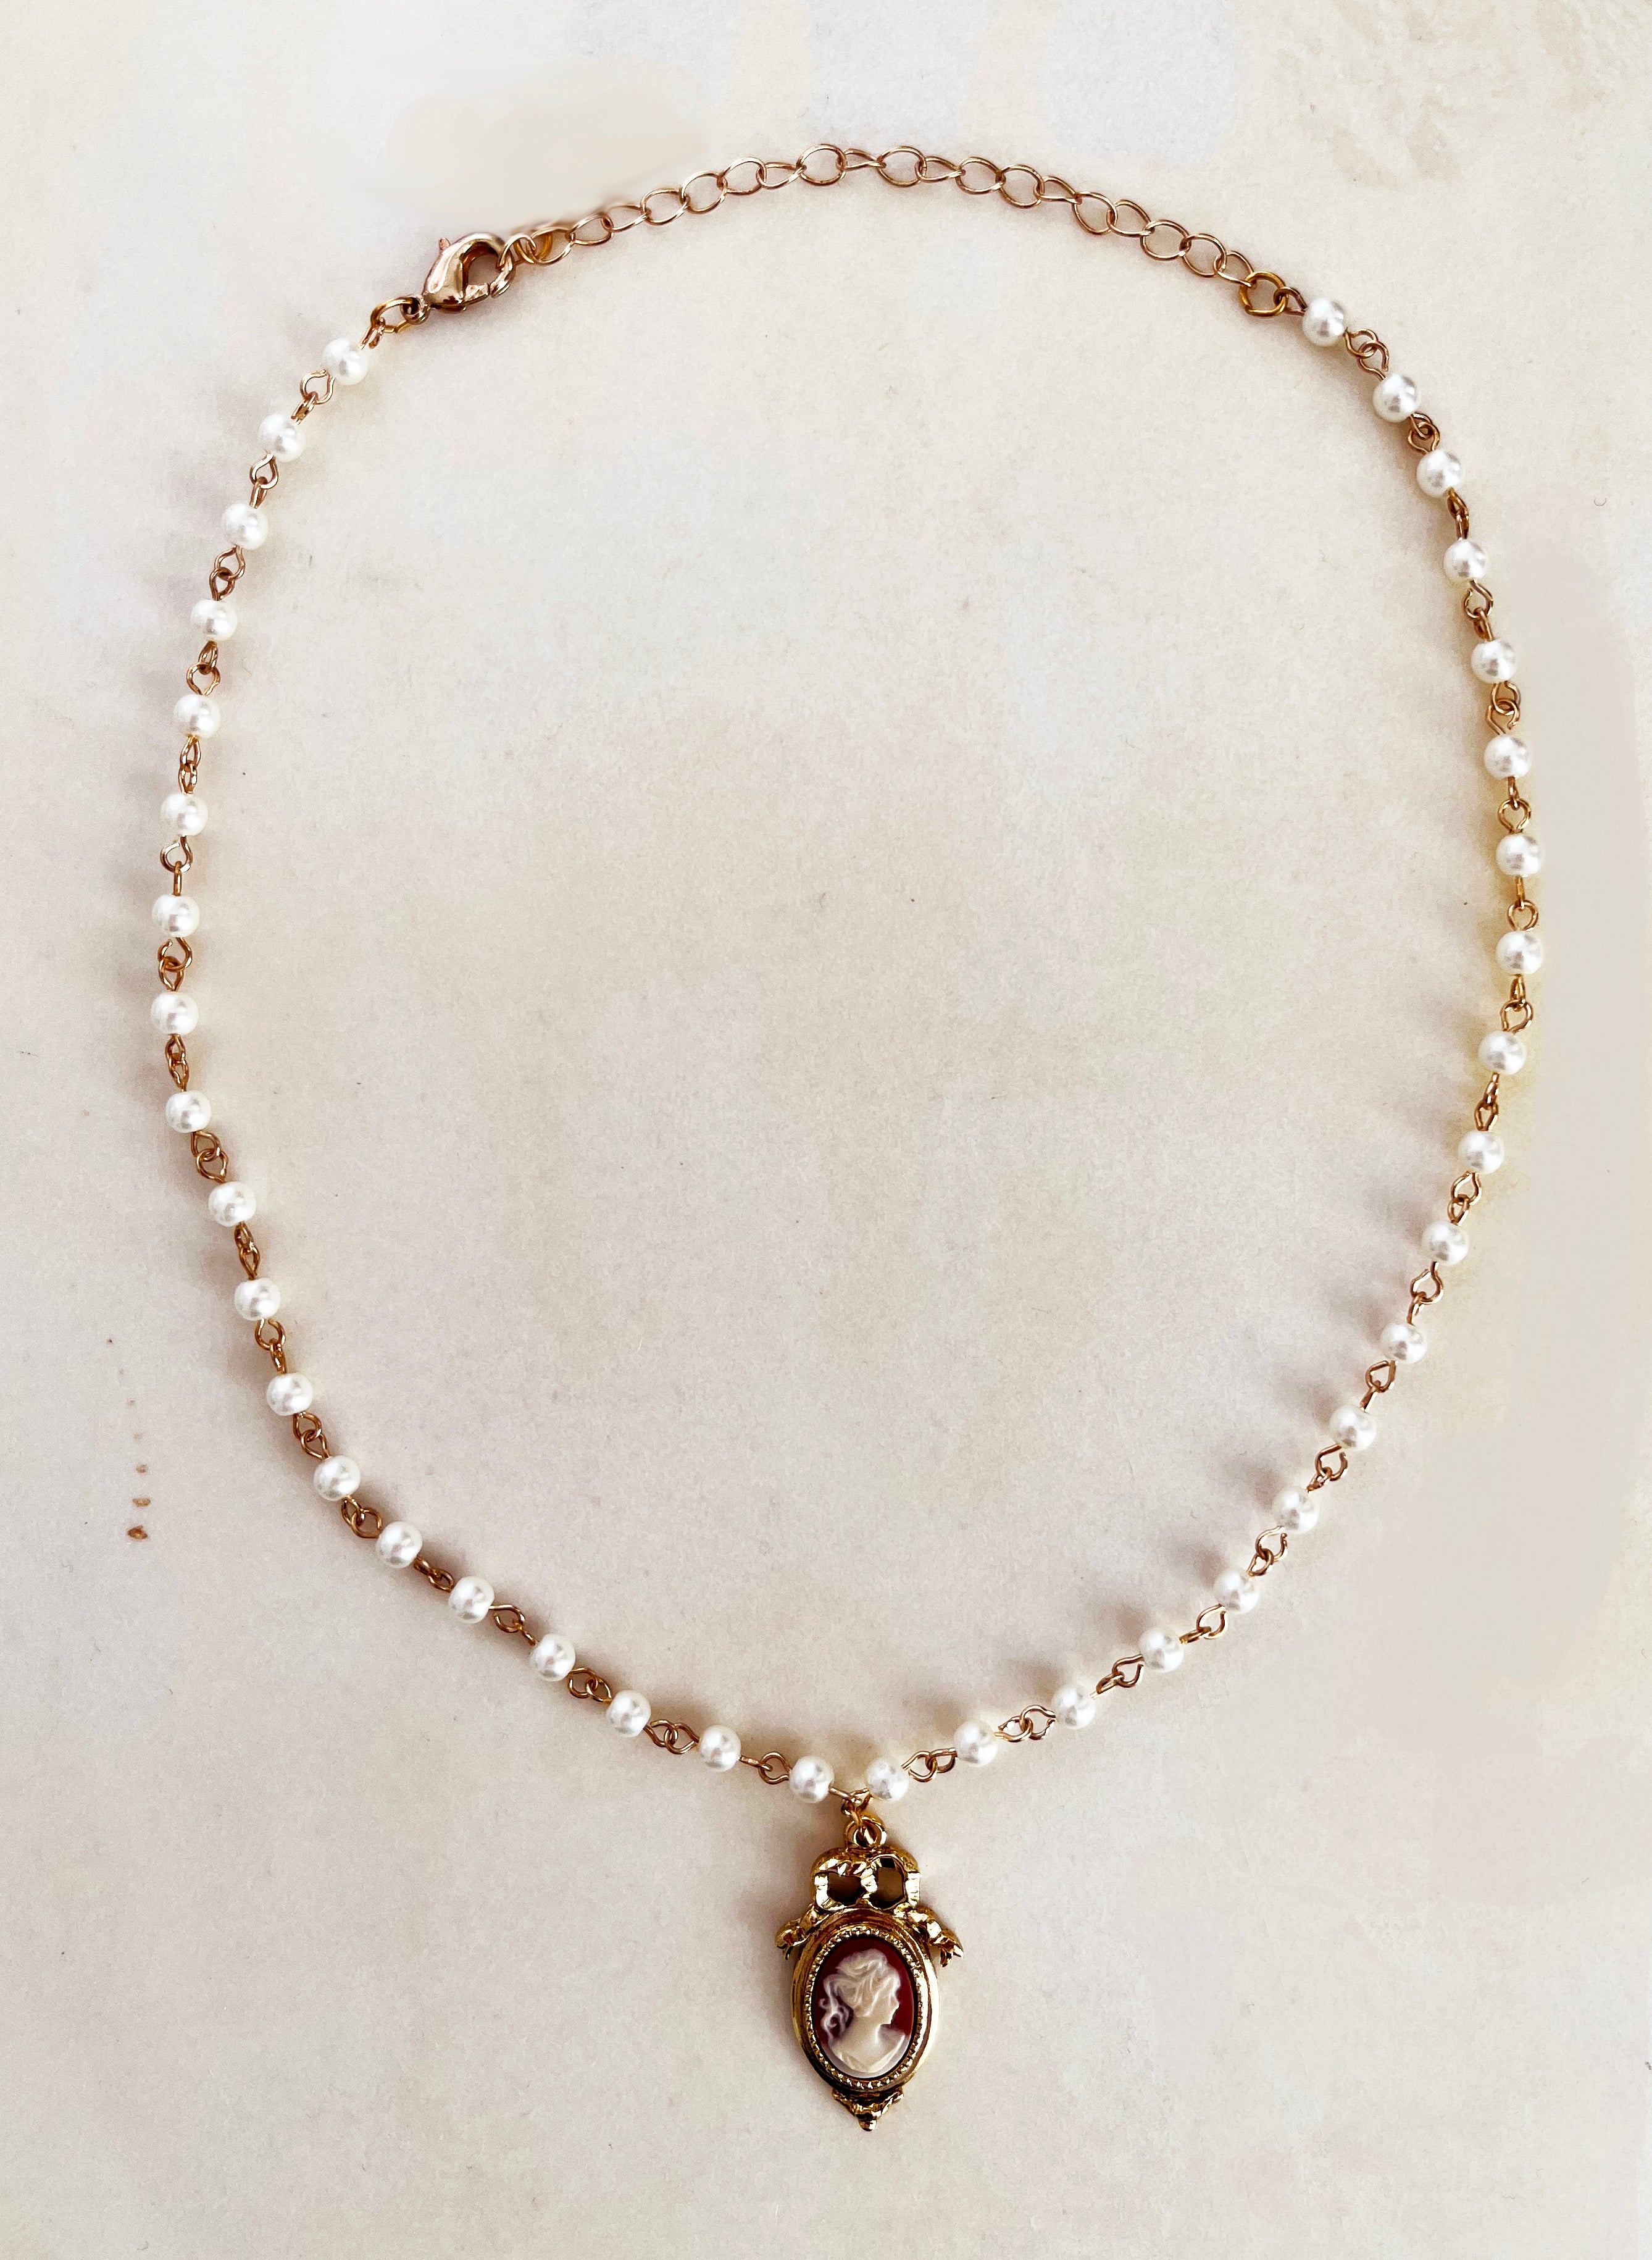 Anne Shirley's Cameo Necklace